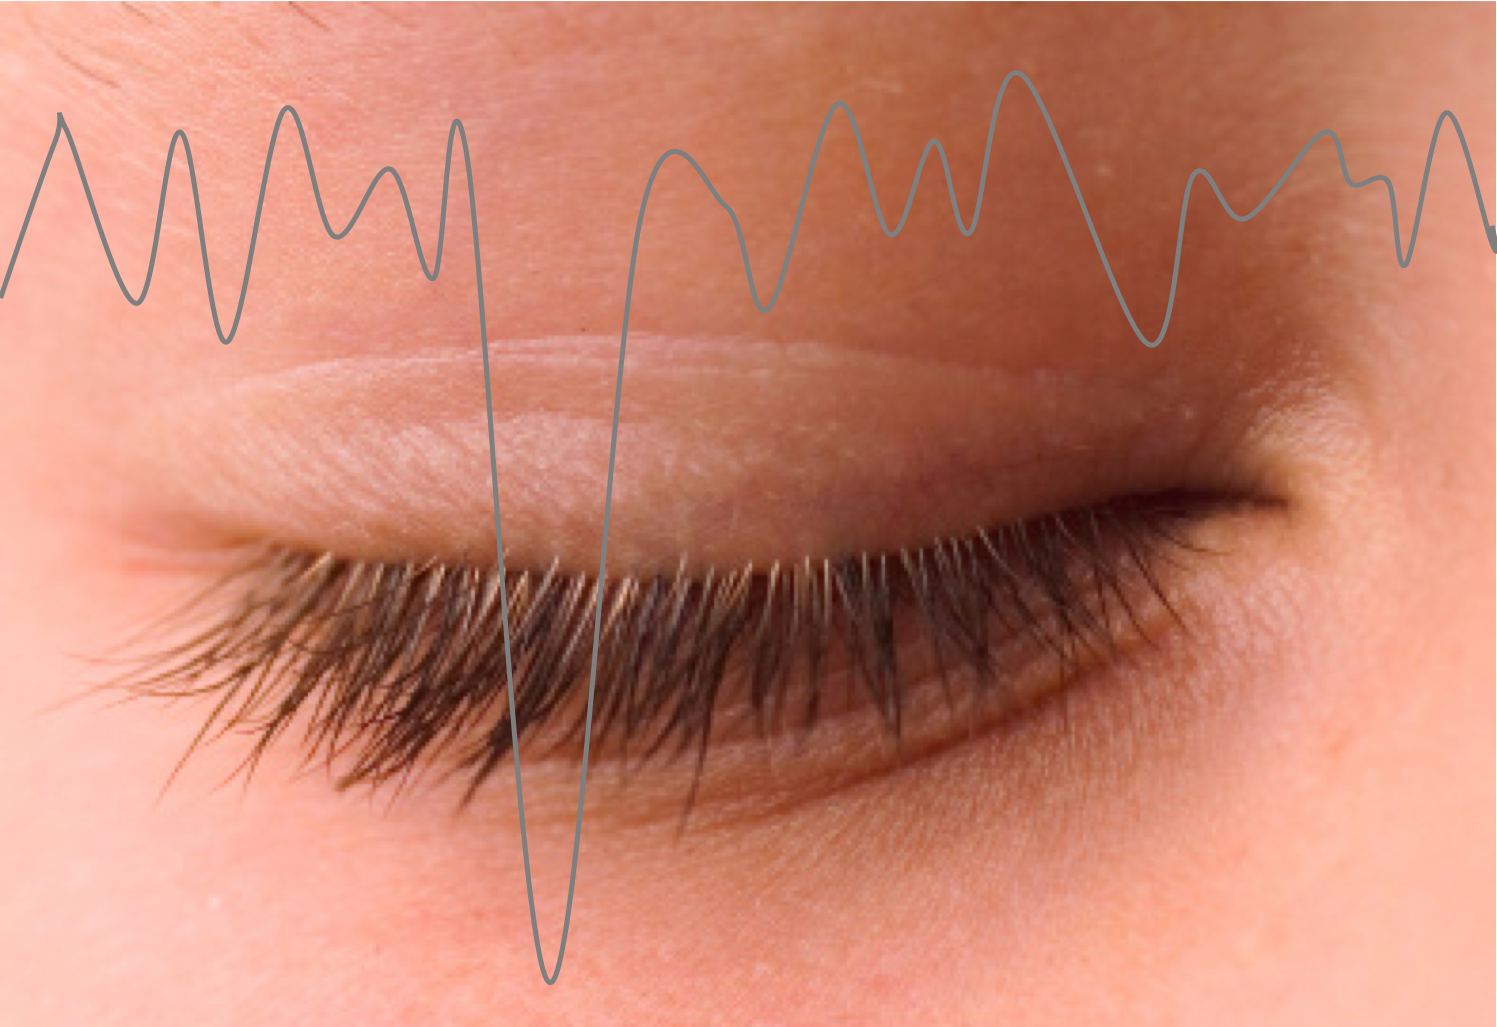 How Fast is the Average Blink? The Human Eyeblink can last up to